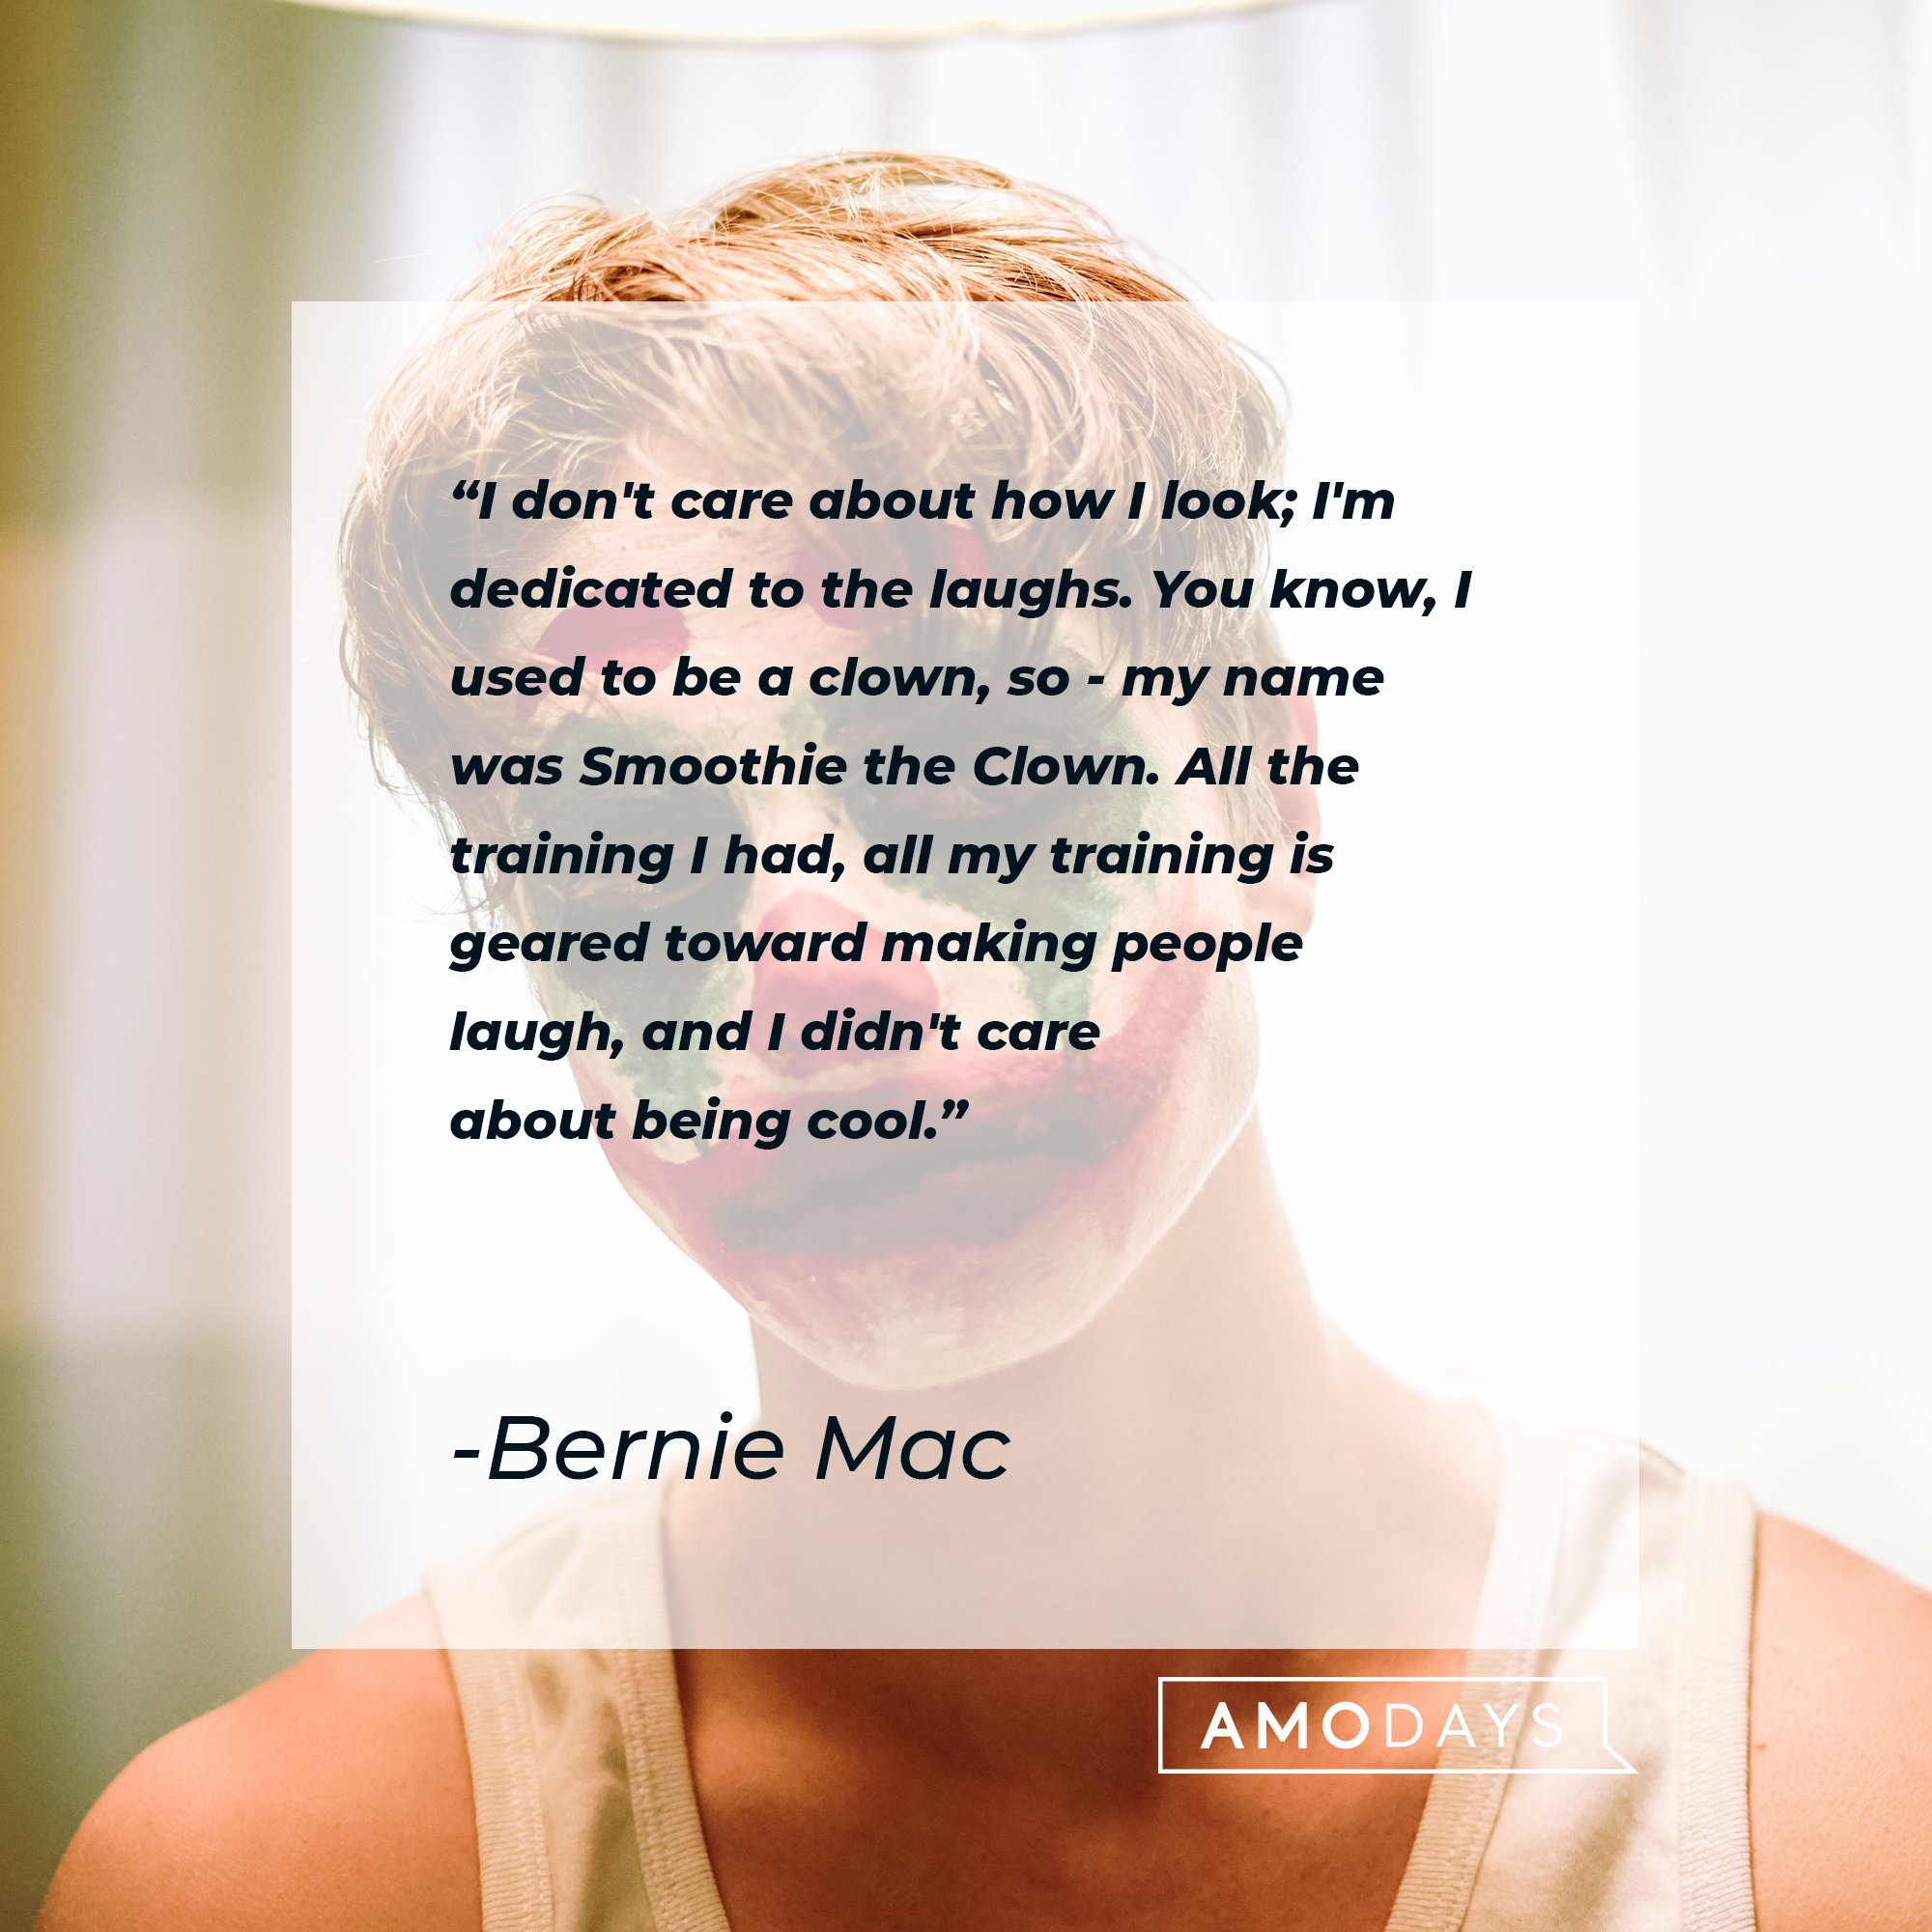 Bernie Mac's quote "I don't care about how I look; I'm dedicated to the laughs. You know, I used to be a clown, so - my name was Smoothie the Clown. All the training I had, all my training is geared toward making people laugh, and I didn't care about being cool." | Source: Unsplash.com